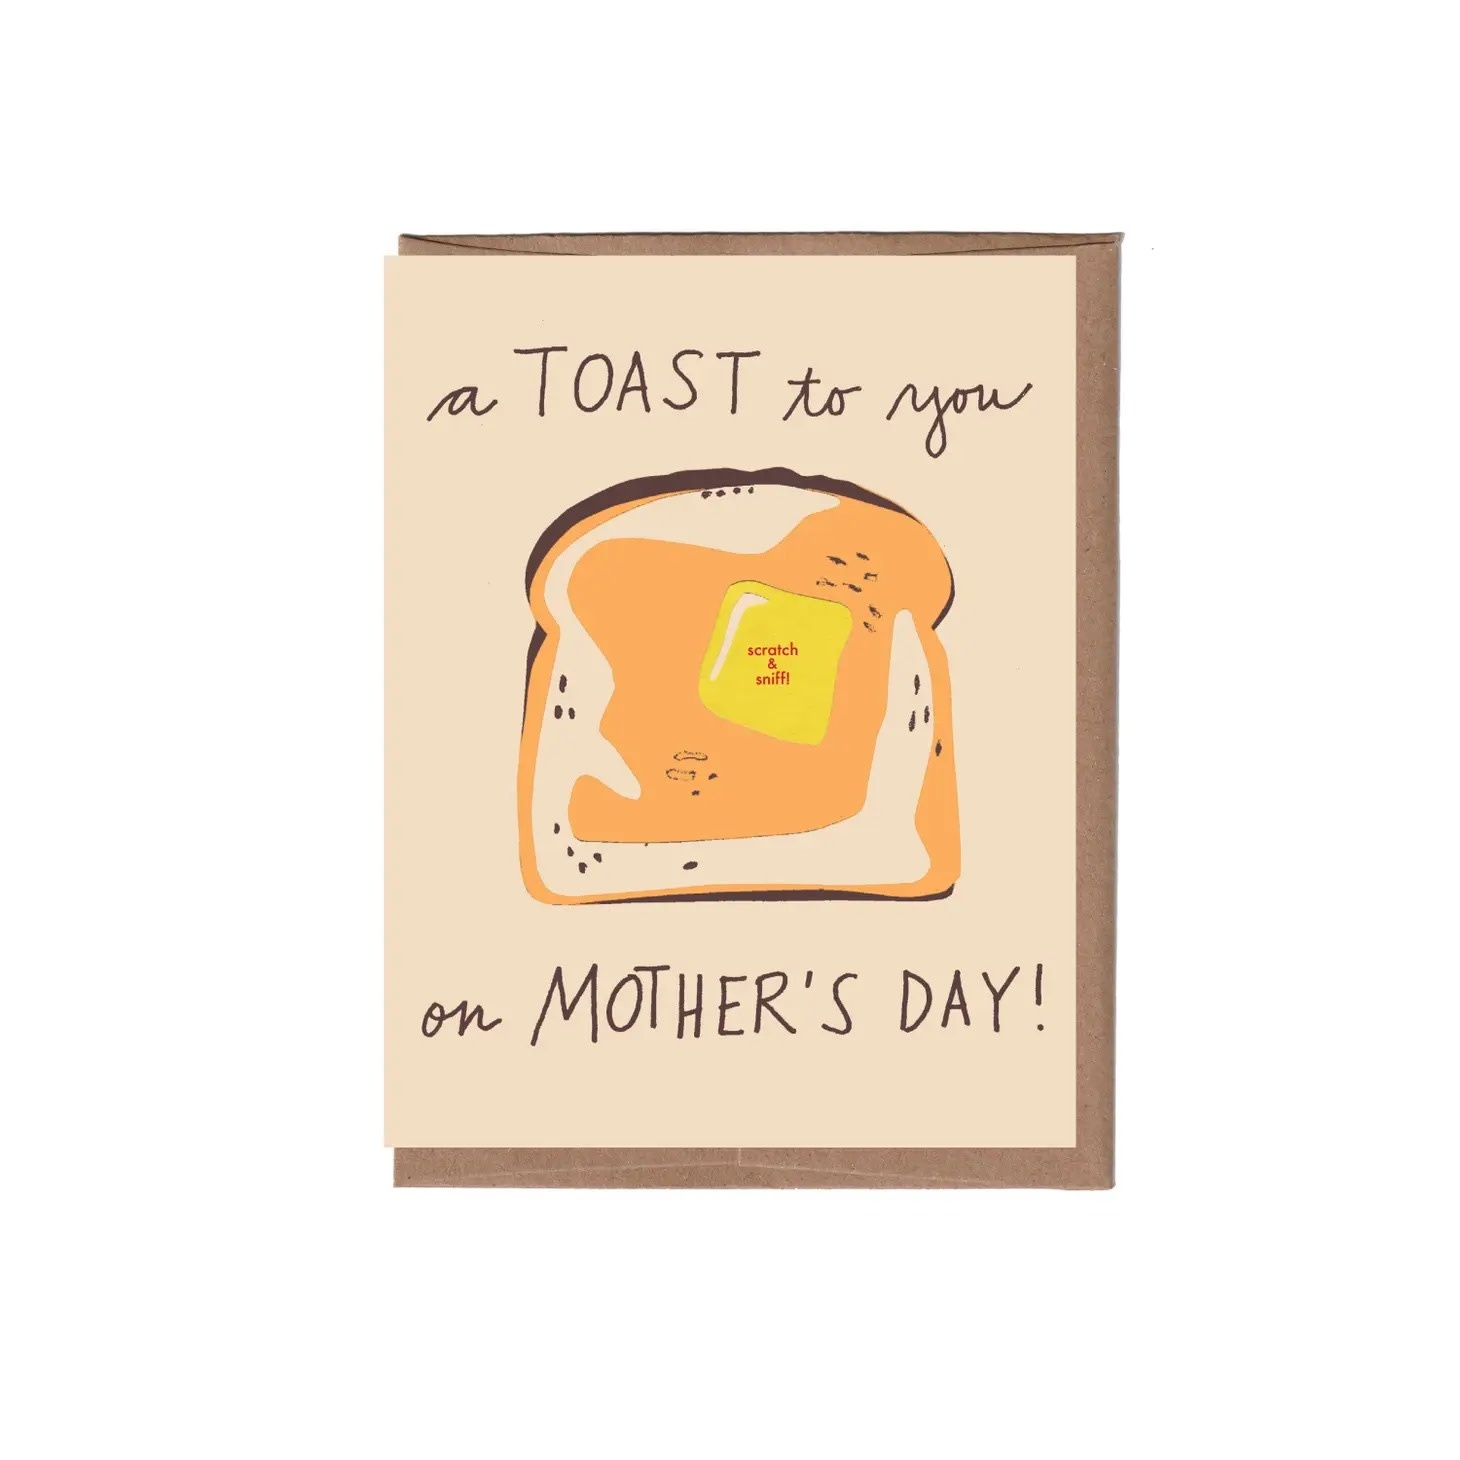 La Familia Green - LFG Scratch & Sniff "A Toast To You On Mothers Day" Card